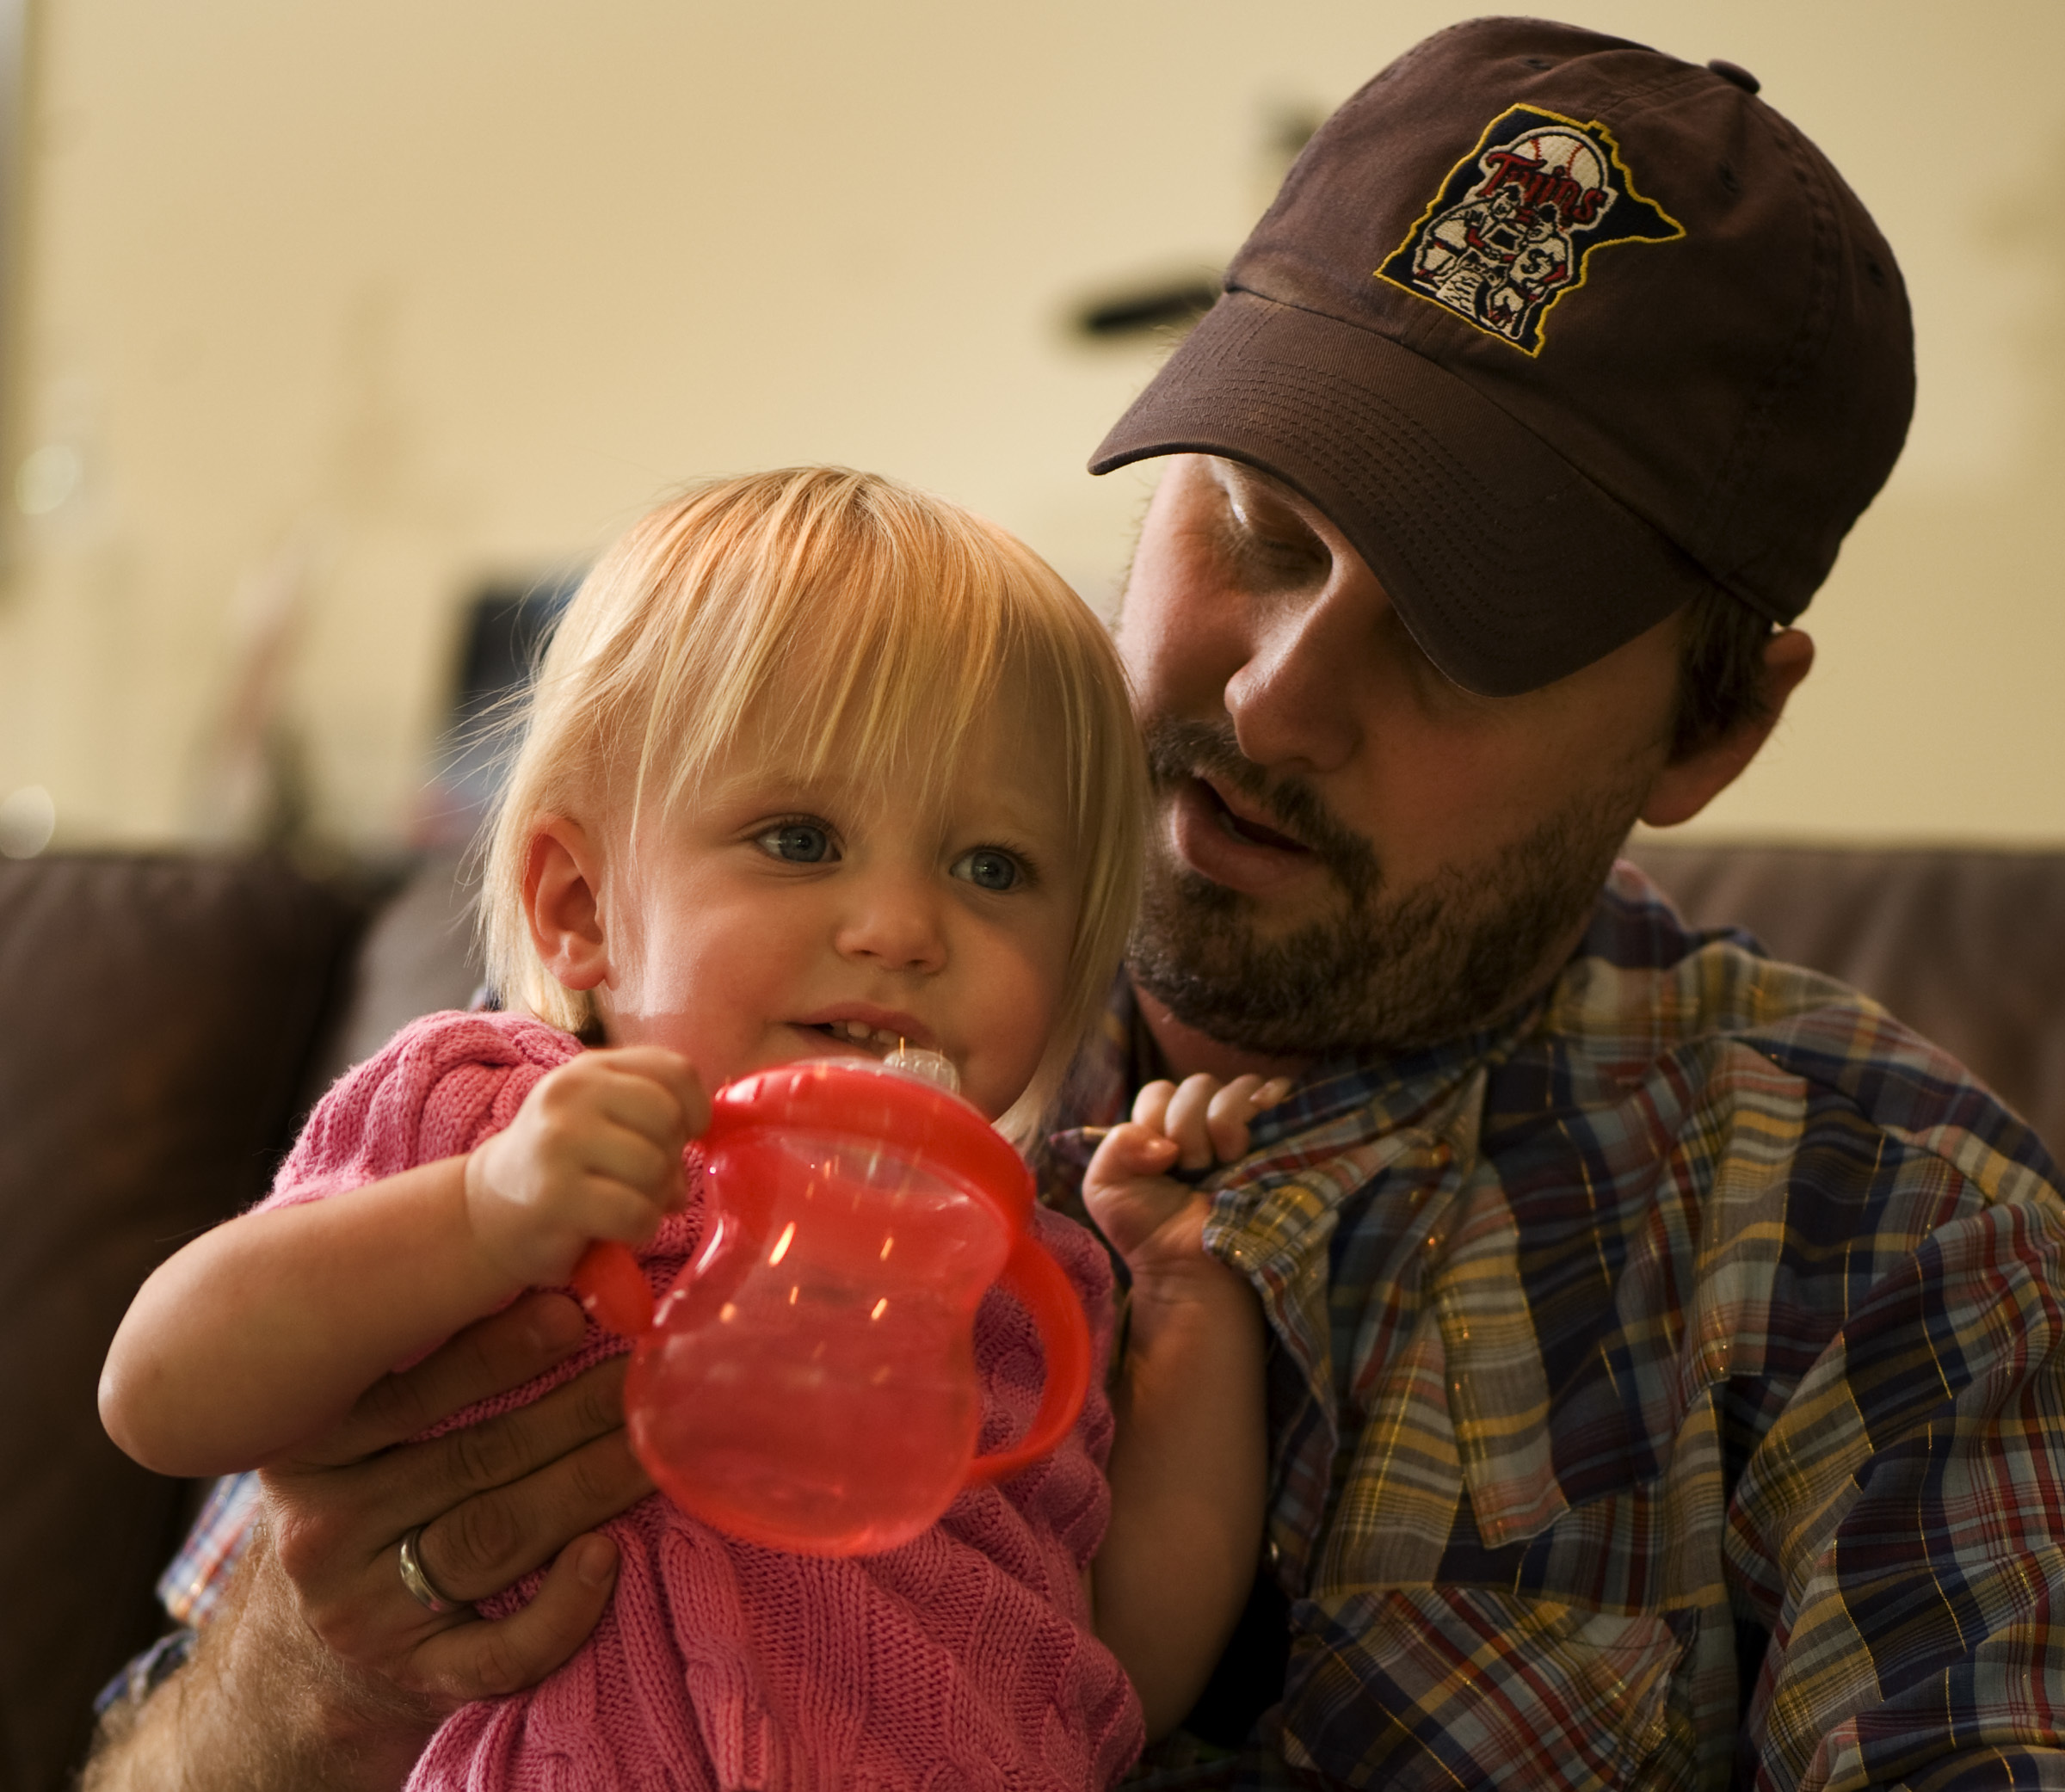 Matt Logelin with his 18 month old daughter Maddy in 2009 (David Brewster/Star Tribune via Getty Images)